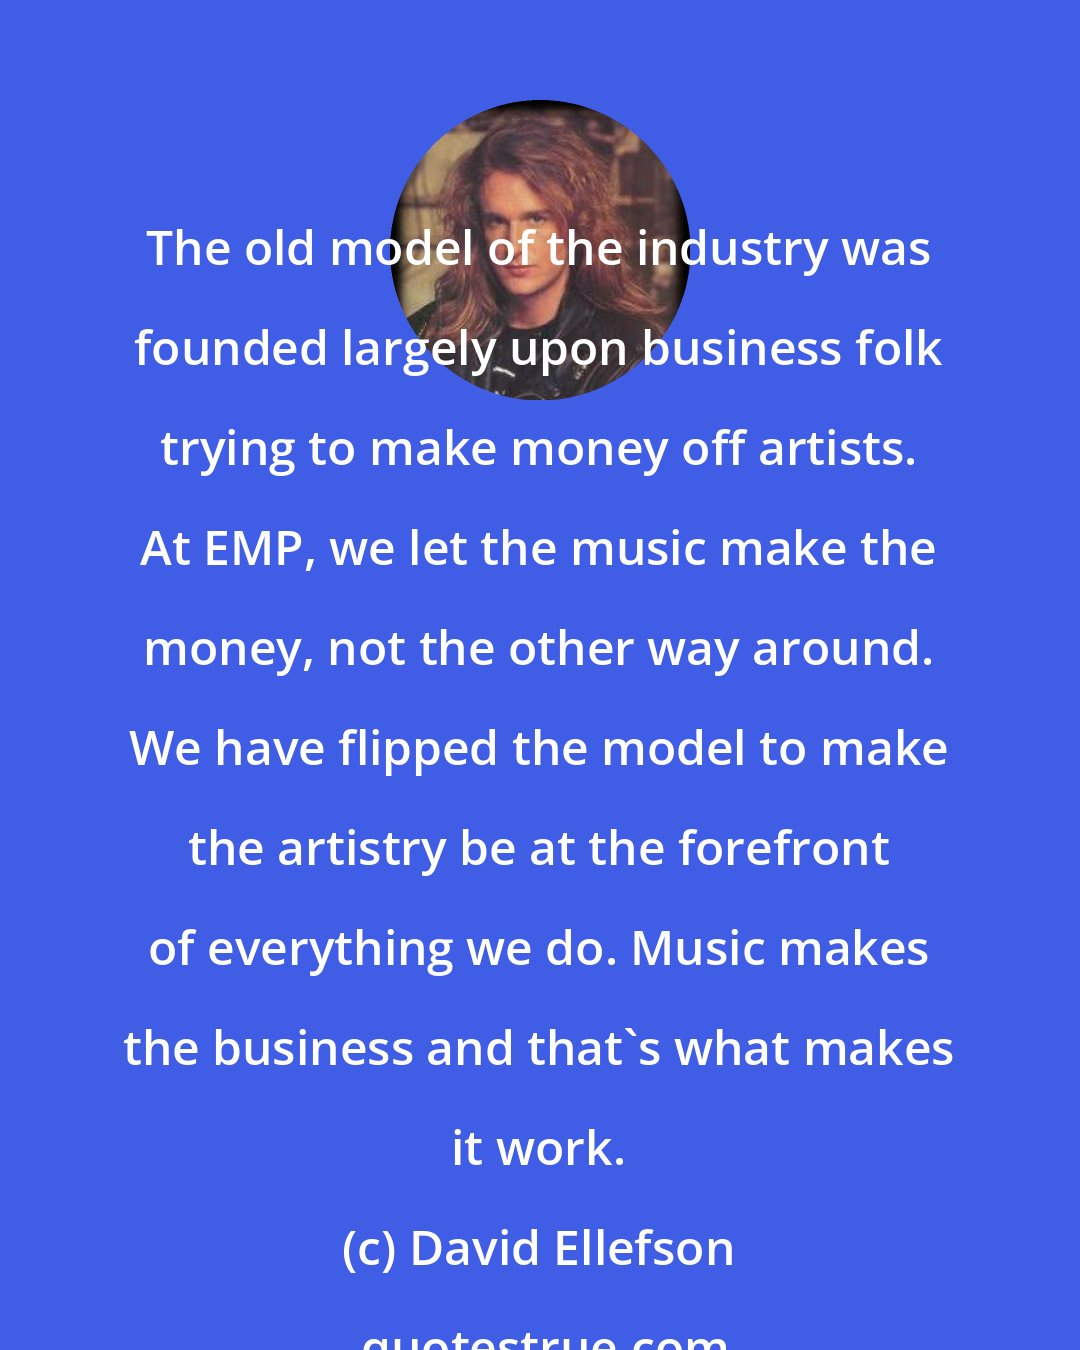 David Ellefson: The old model of the industry was founded largely upon business folk trying to make money off artists. At EMP, we let the music make the money, not the other way around. We have flipped the model to make the artistry be at the forefront of everything we do. Music makes the business and that's what makes it work.